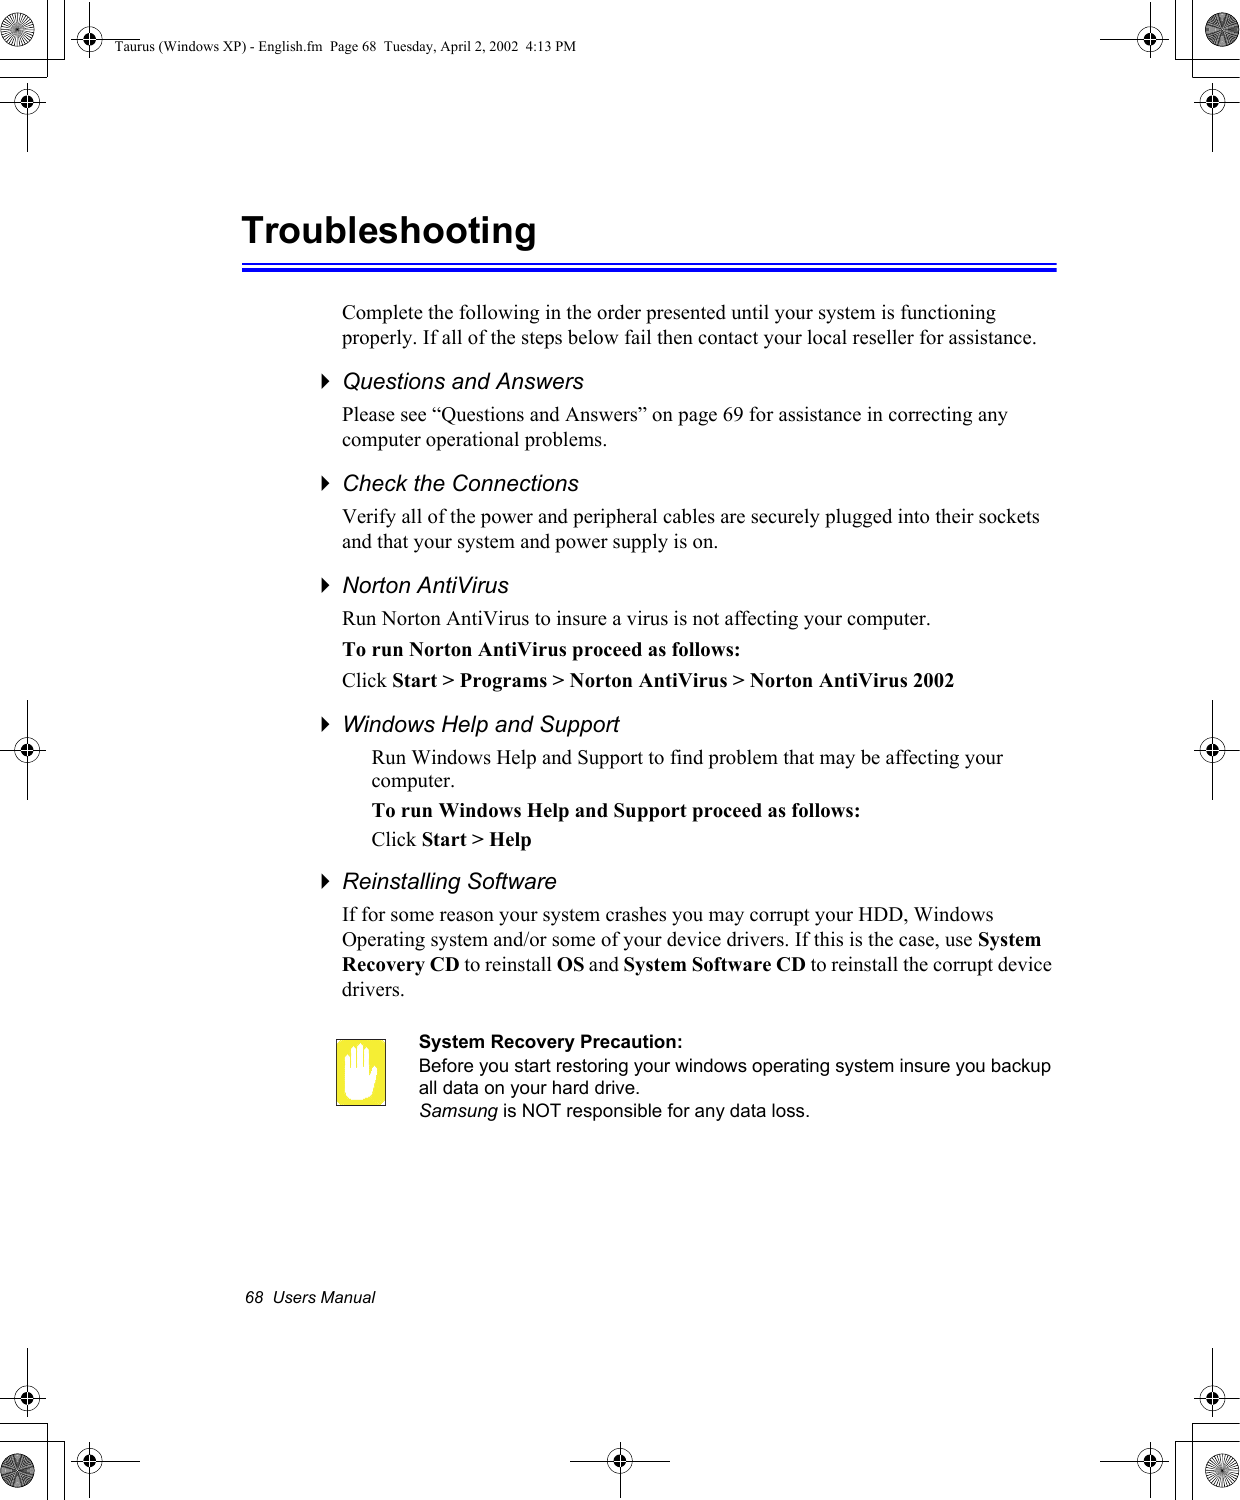 68  Users ManualTroubleshootingComplete the following in the order presented until your system is functioning properly. If all of the steps below fail then contact your local reseller for assistance.Questions and AnswersPlease see “Questions and Answers” on page 69 for assistance in correcting any computer operational problems.Check the ConnectionsVerify all of the power and peripheral cables are securely plugged into their sockets and that your system and power supply is on.Norton AntiVirus Run Norton AntiVirus to insure a virus is not affecting your computer.To run Norton AntiVirus proceed as follows:Click Start &gt; Programs &gt; Norton AntiVirus &gt; Norton AntiVirus 2002Windows Help and SupportRun Windows Help and Support to find problem that may be affecting your computer.To run Windows Help and Support proceed as follows:Click Start &gt; HelpReinstalling SoftwareIf for some reason your system crashes you may corrupt your HDD, Windows Operating system and/or some of your device drivers. If this is the case, use System Recovery CD to reinstall OS and System Software CD to reinstall the corrupt device drivers.System Recovery Precaution:Before you start restoring your windows operating system insure you backup all data on your hard drive. Samsung is NOT responsible for any data loss.Taurus (Windows XP) - English.fm  Page 68  Tuesday, April 2, 2002  4:13 PM